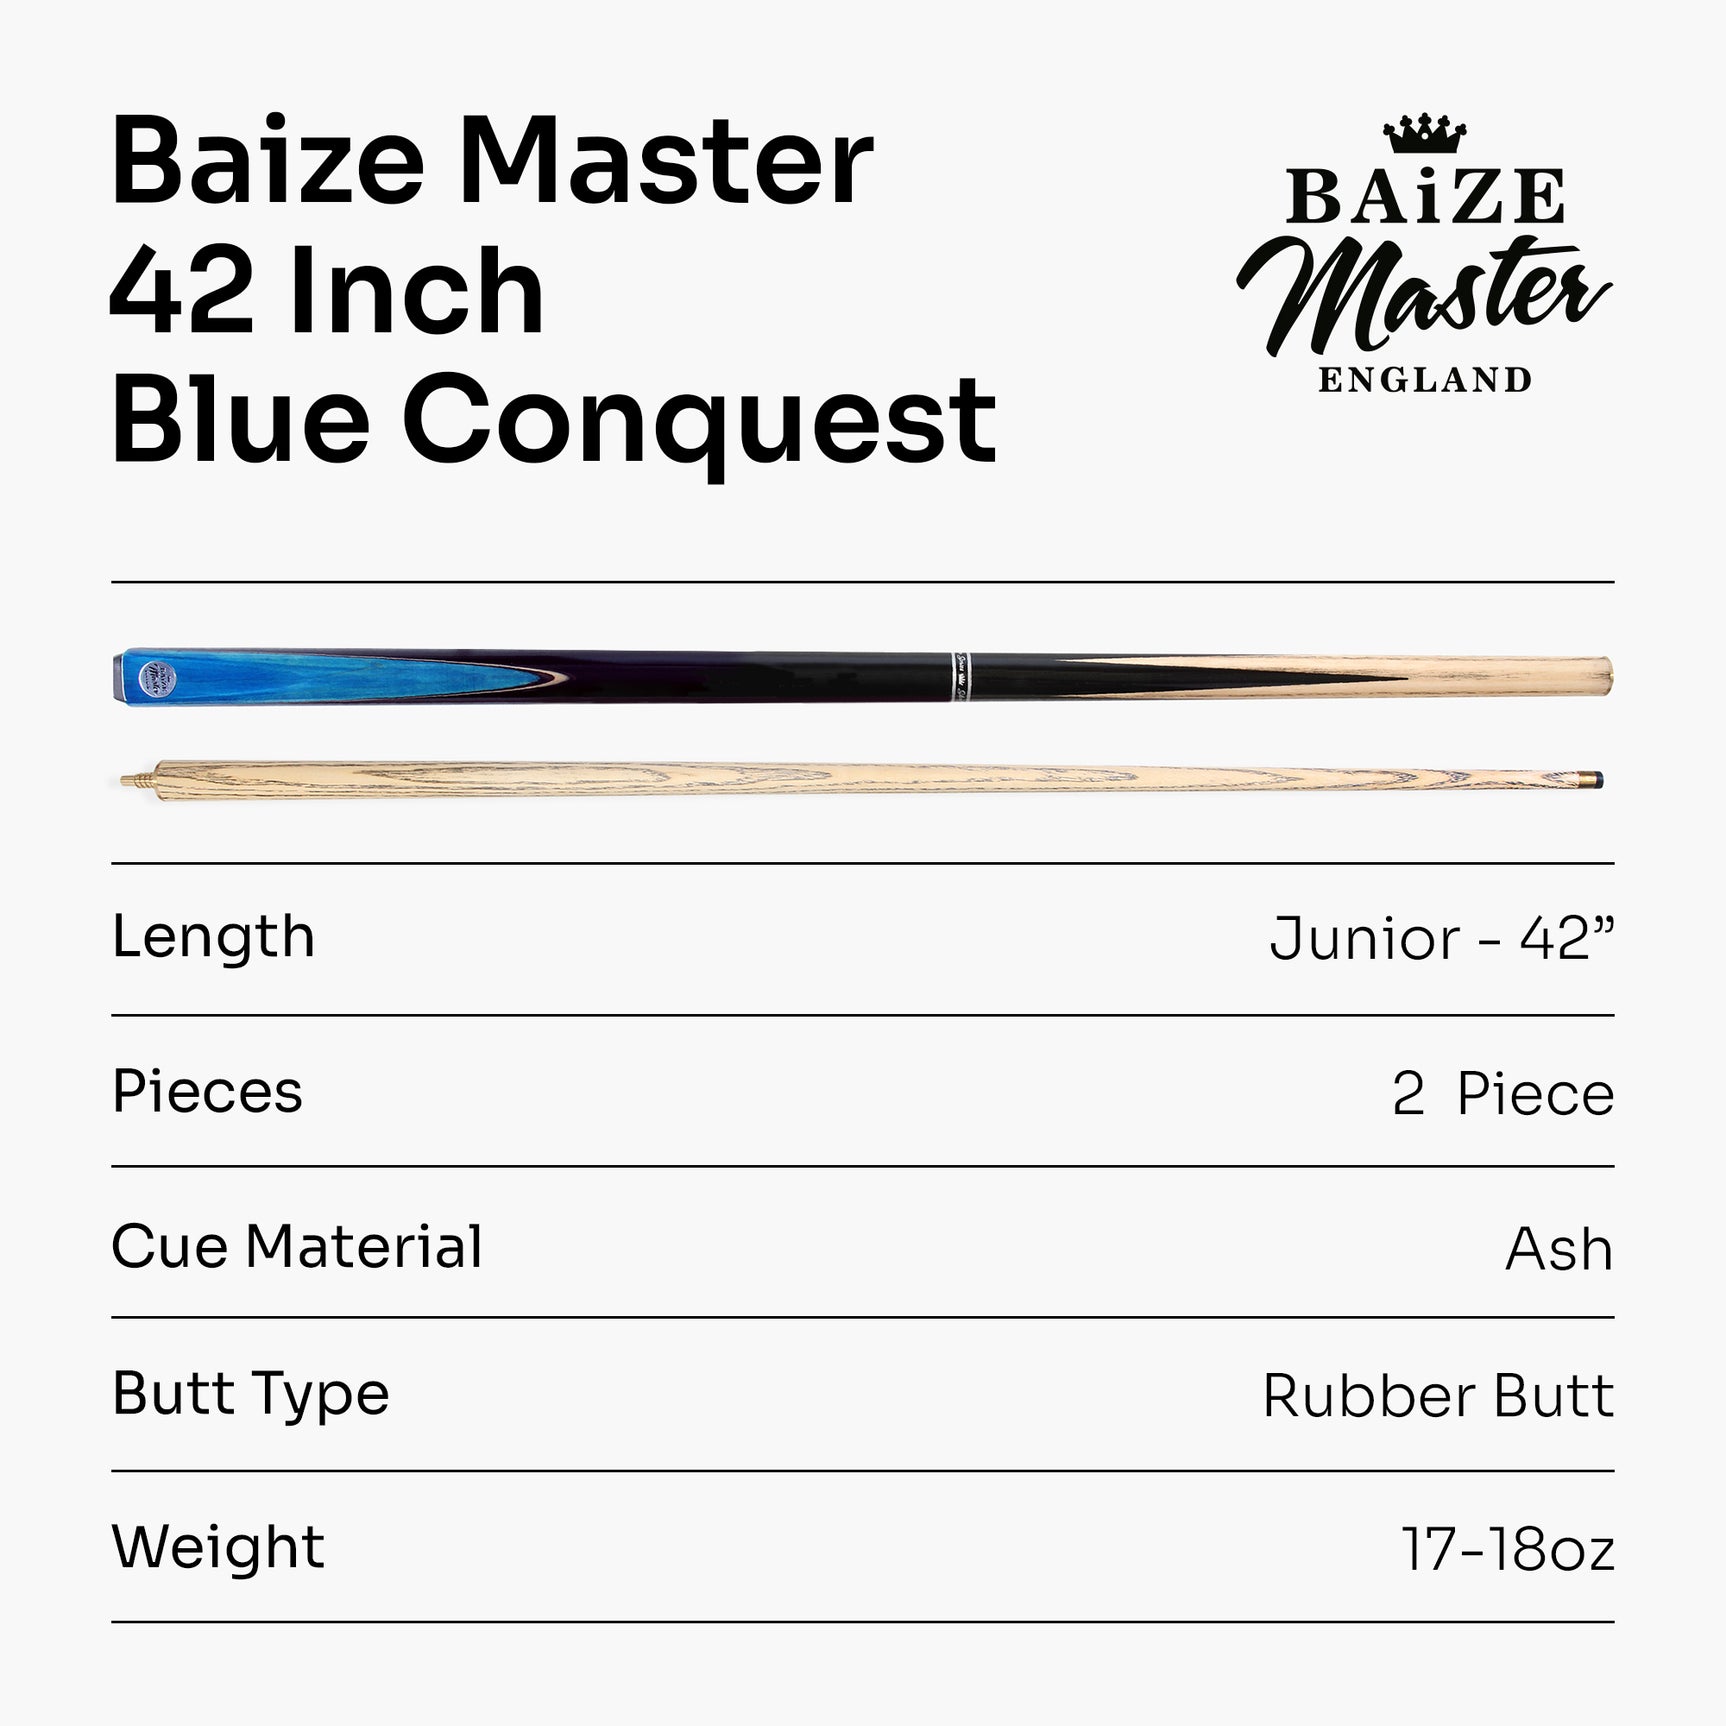 Baize Master CONQUEST 42 Inch 2 Piece Junior Kids Snooker Pool Cue 9.5mm Layered Tip